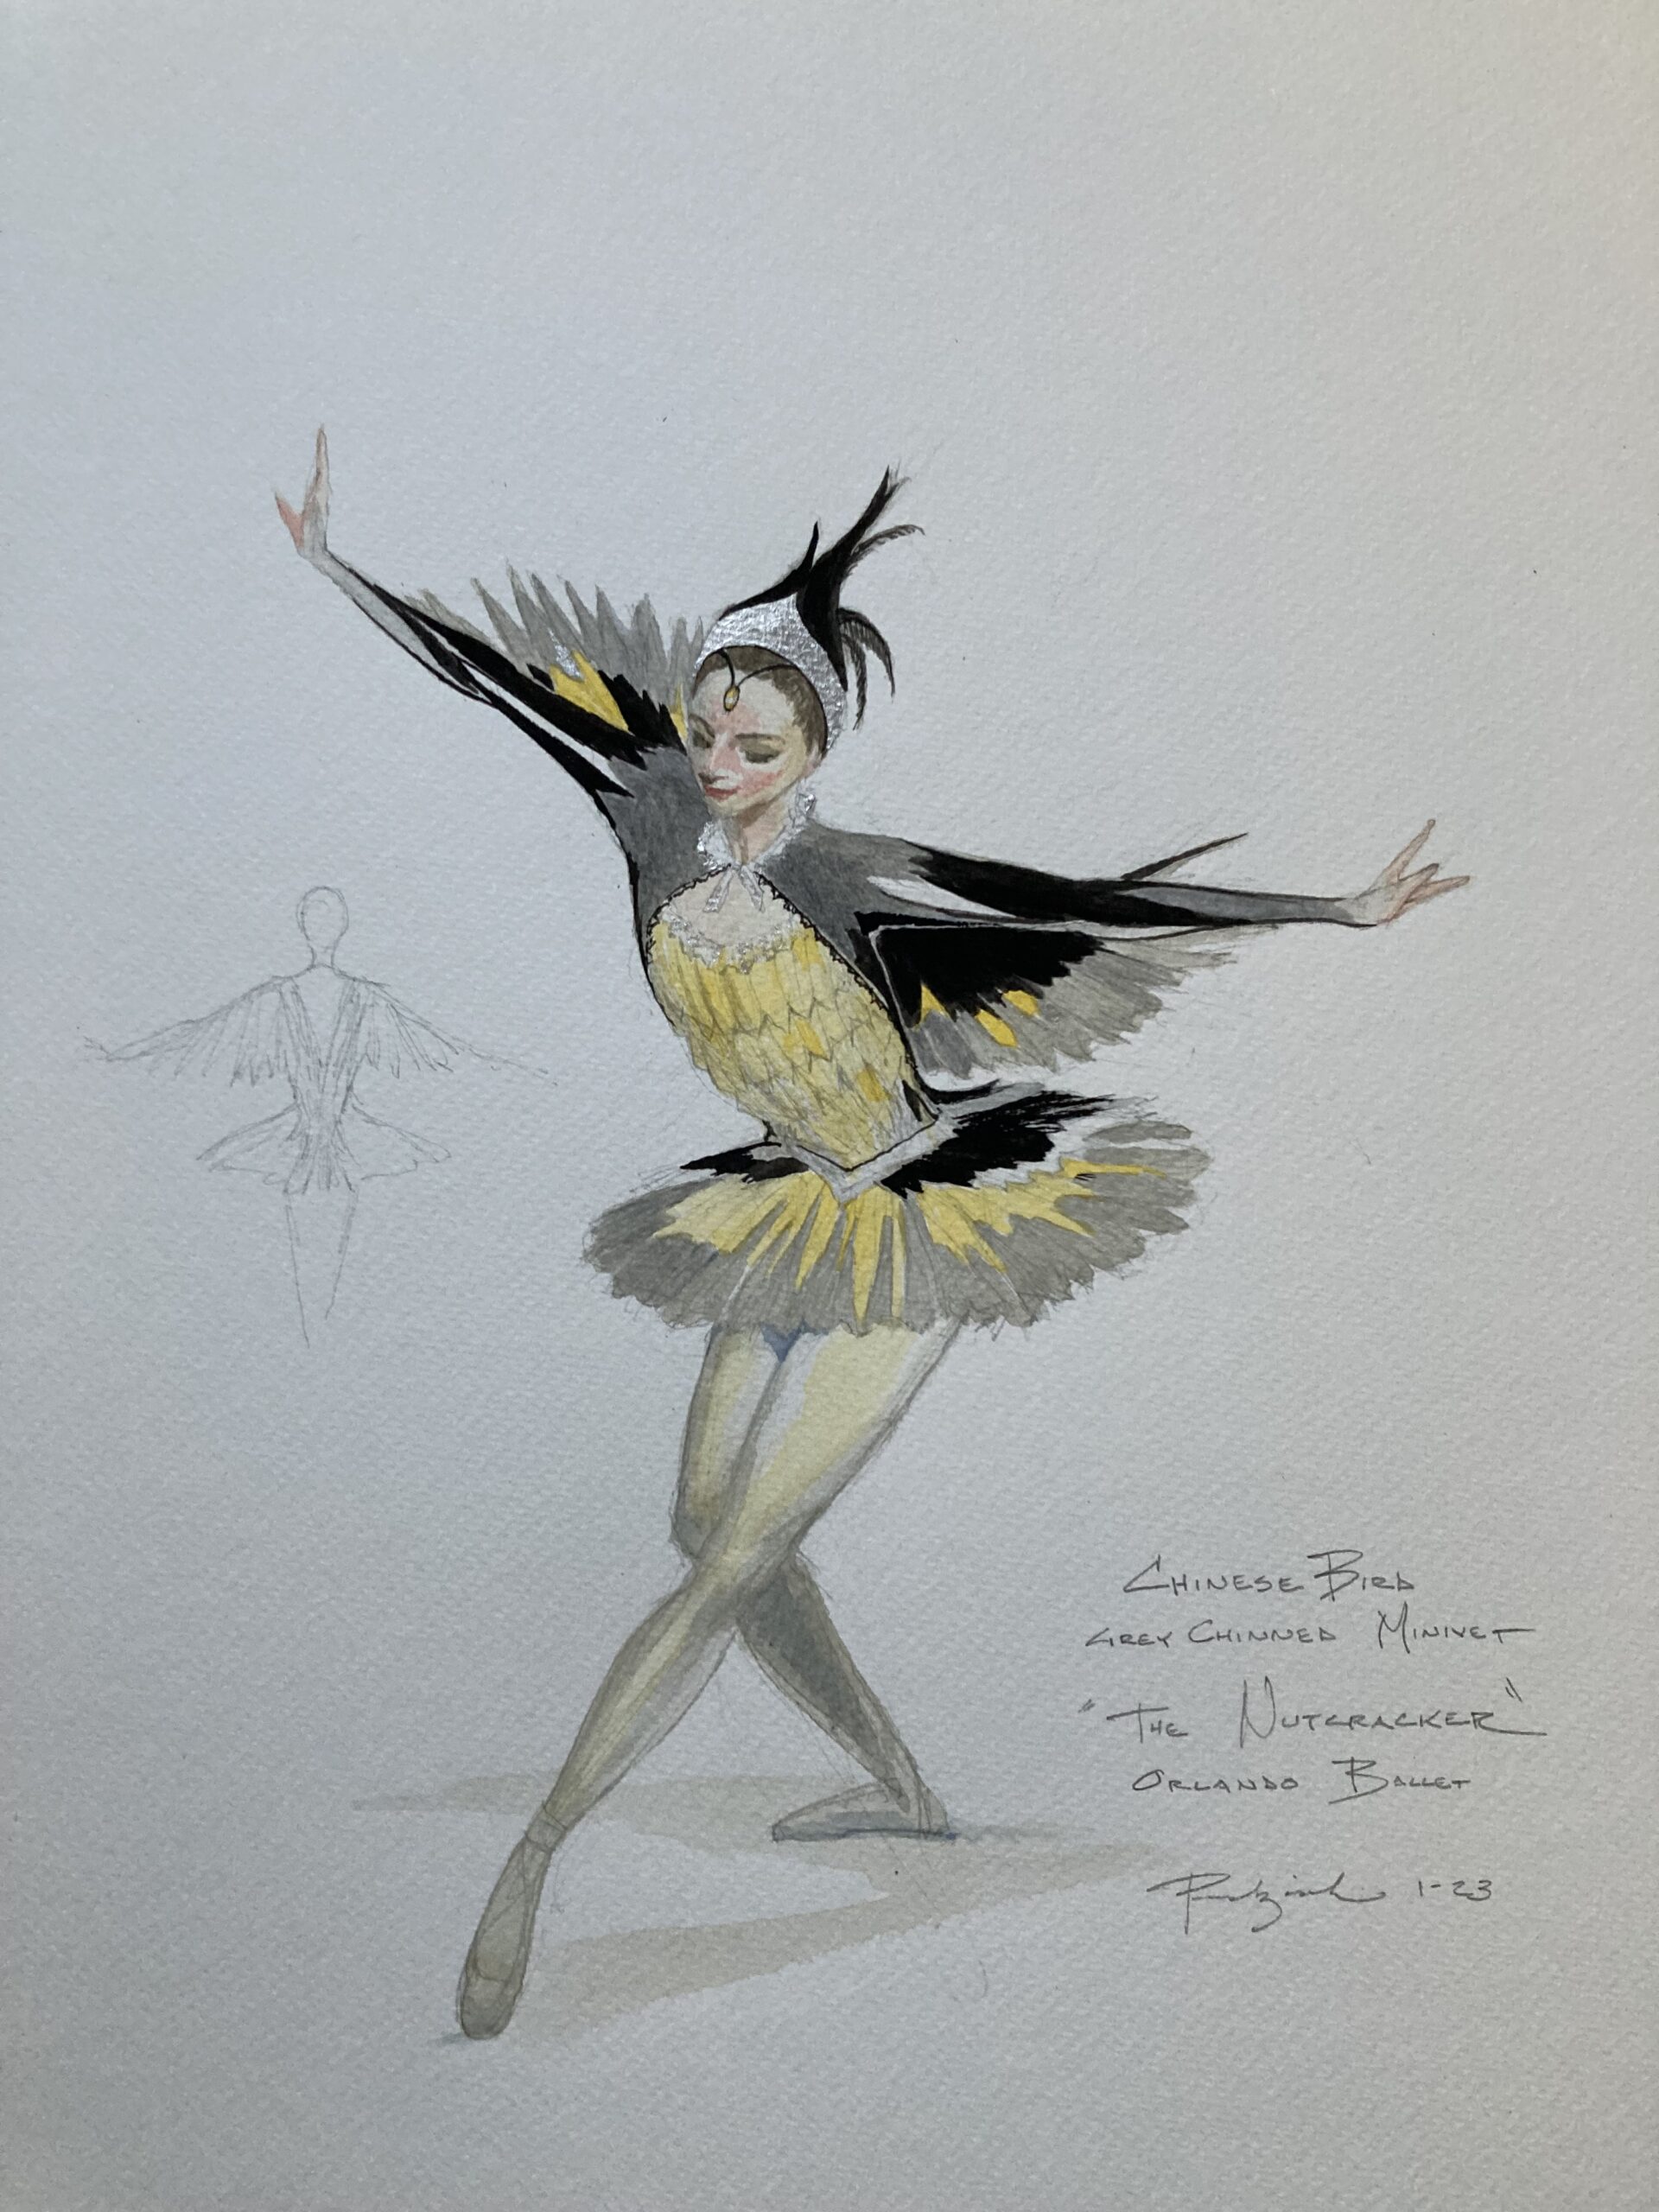 A sketch on paper in pen and watercolor shows for the design for a new Heron costume.